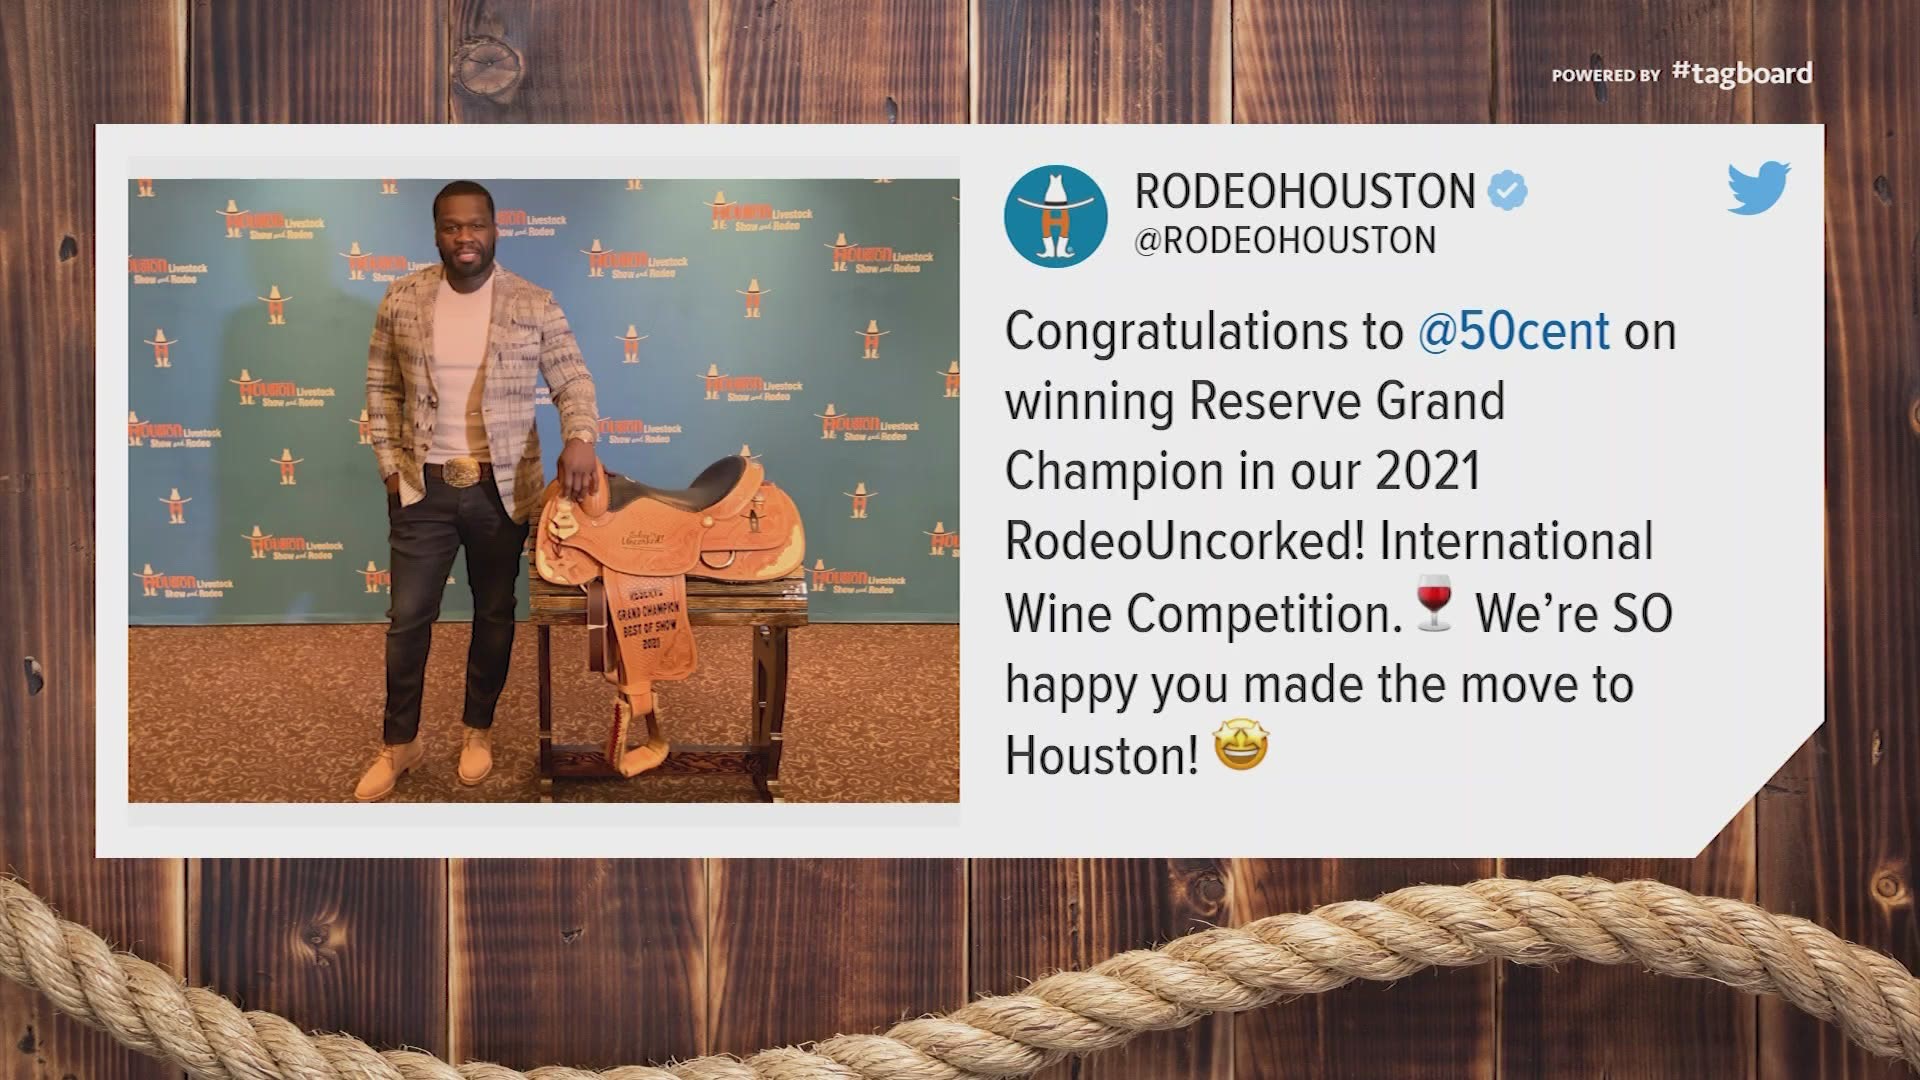 50 Cent's champagne won Reserve Grand Champion Best of Show at RodeoHouston's Rodeo Uncorked! The rapper recently announced his move to Houston.